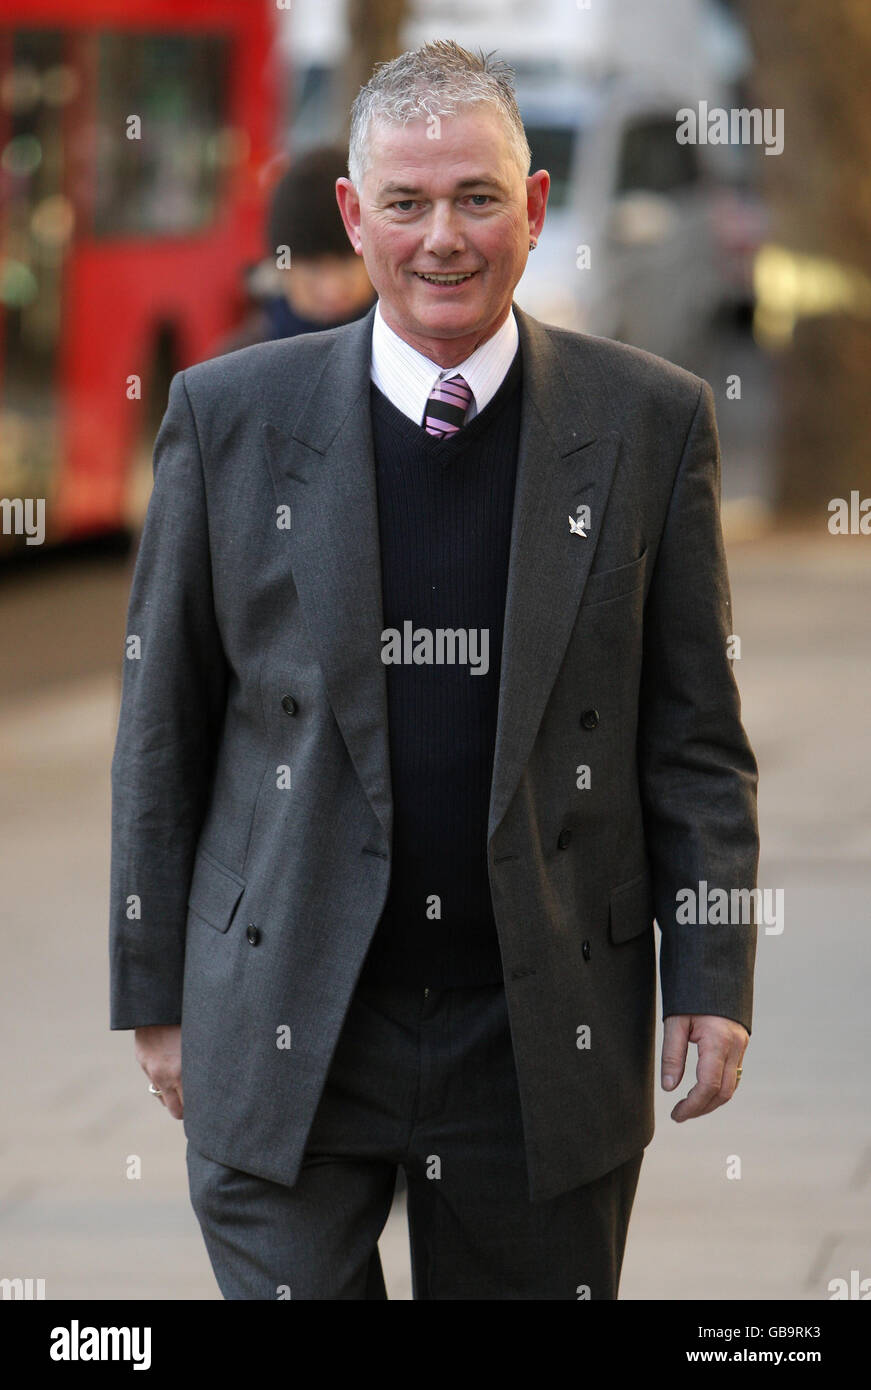 Landlord Hamish Howitt arrives at the High Court in London, where he is locked in a legal battle over moves by a local council to shut down his business after he defied the smoking ban. Stock Photo